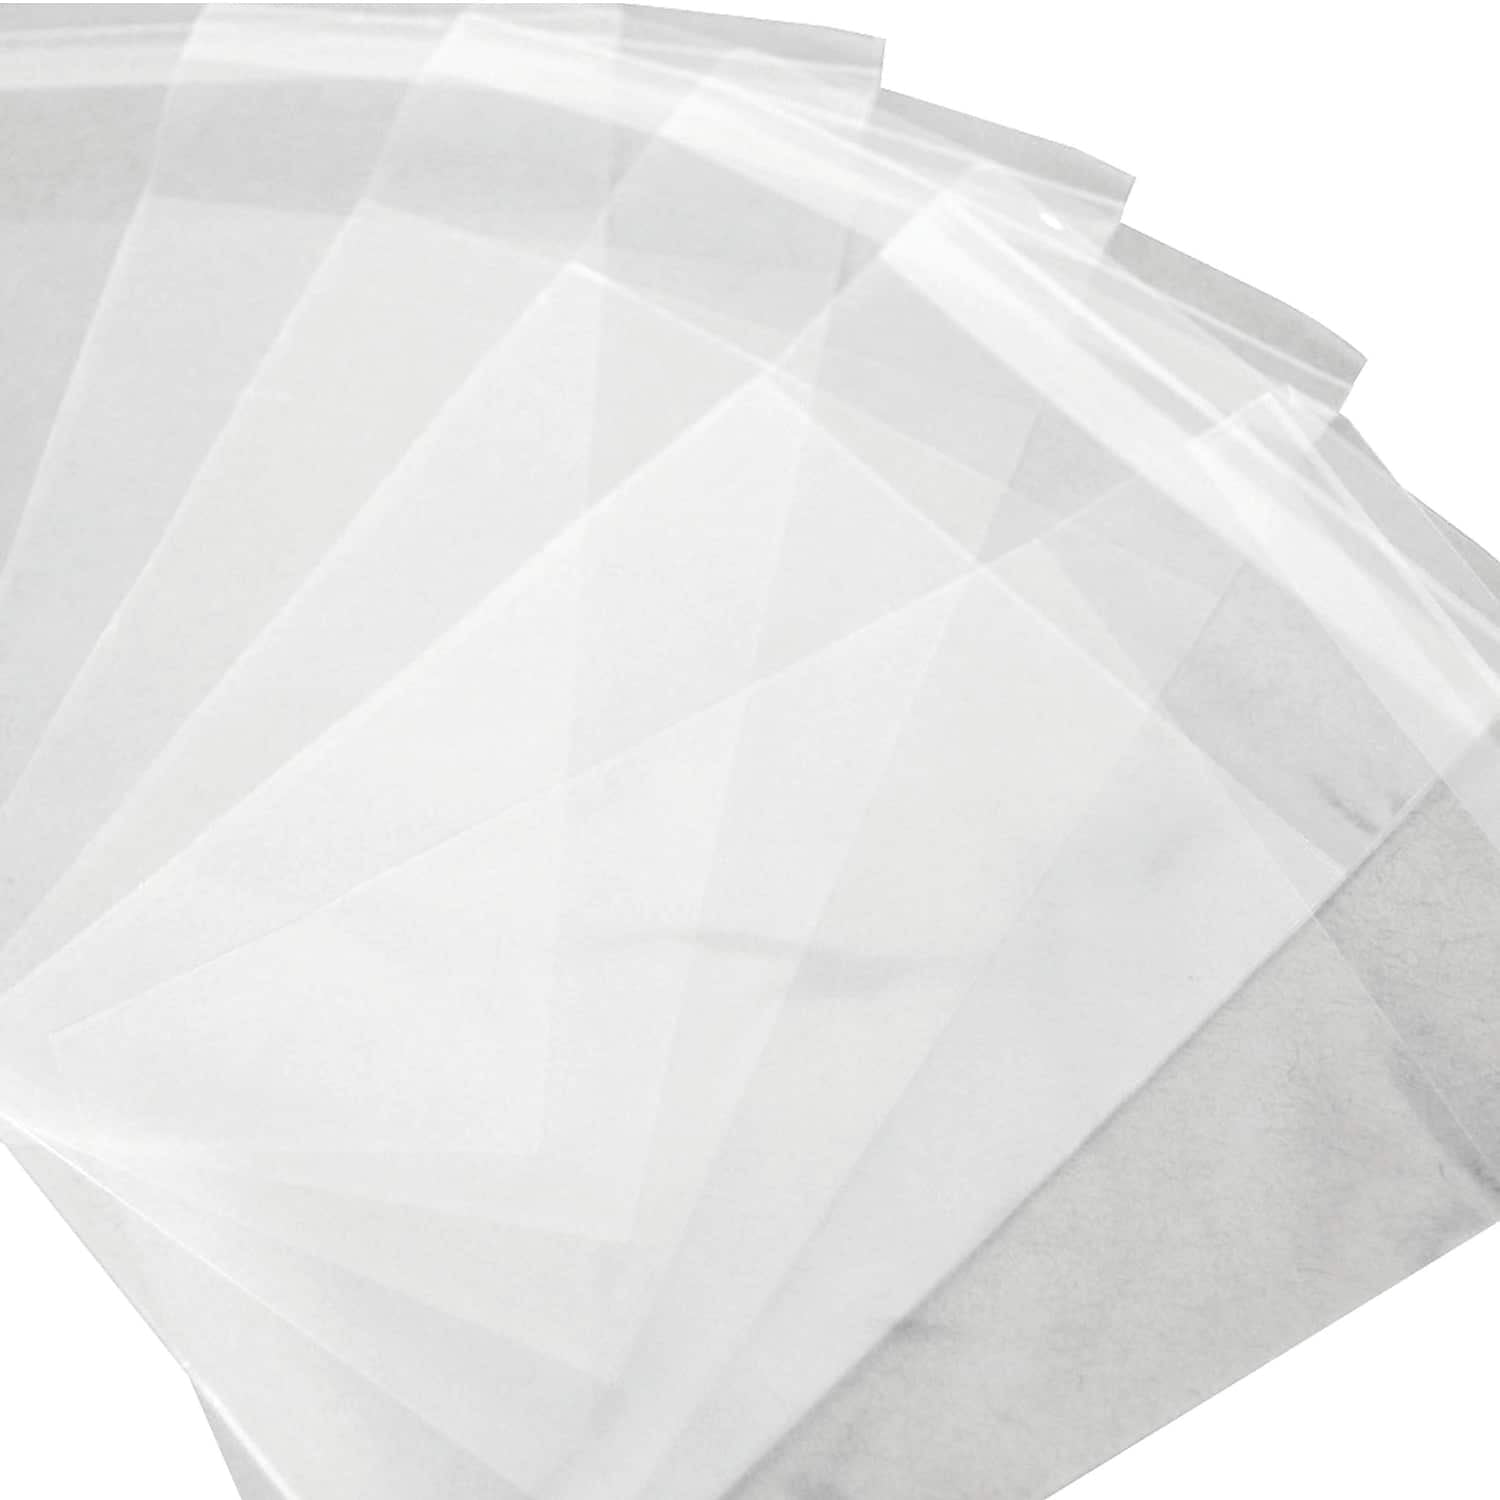 Pbr118 6 X 8 In. 1.5 Mil Resealable Polypropylene Bags Case, Pack Of 1000